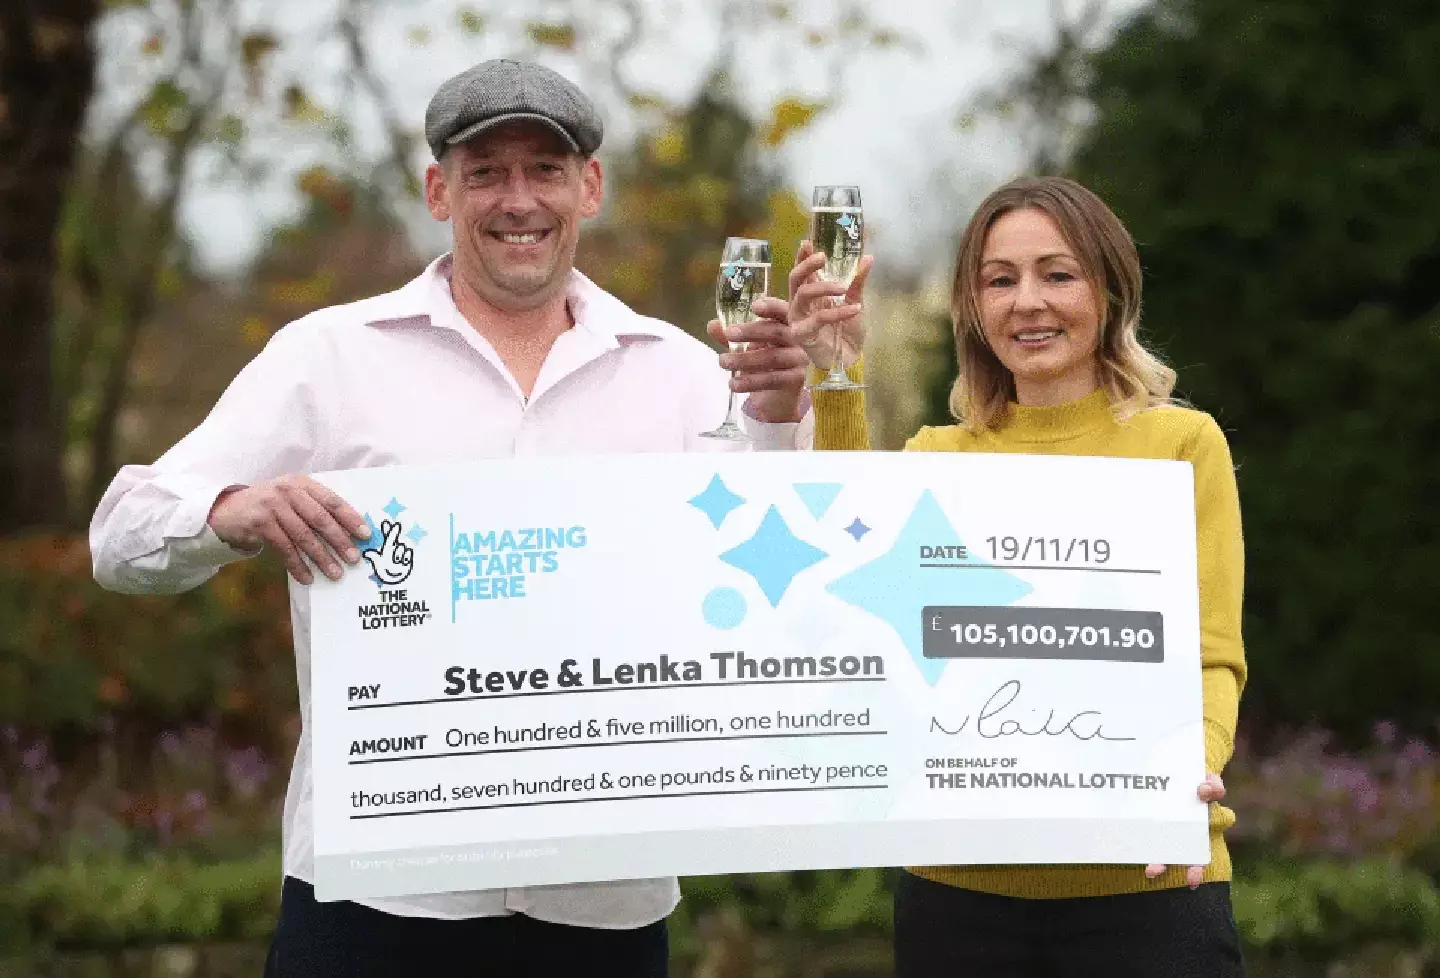 The builder won an incredible prize after entering the EuroMillions in 2019.